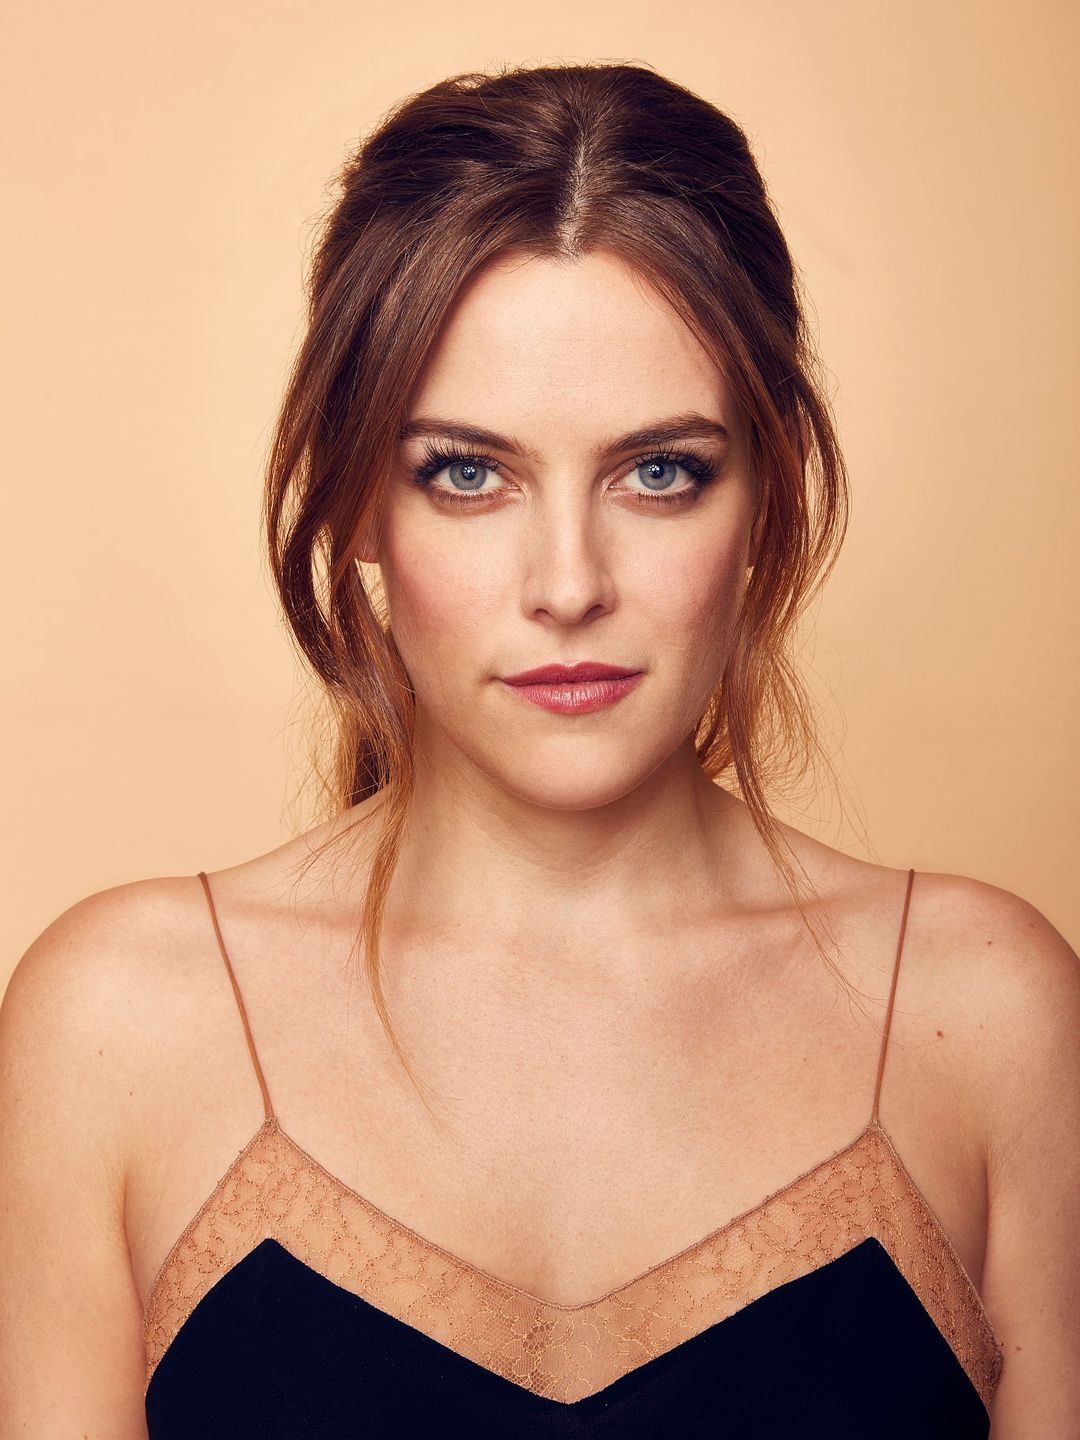 Riley Keough early career